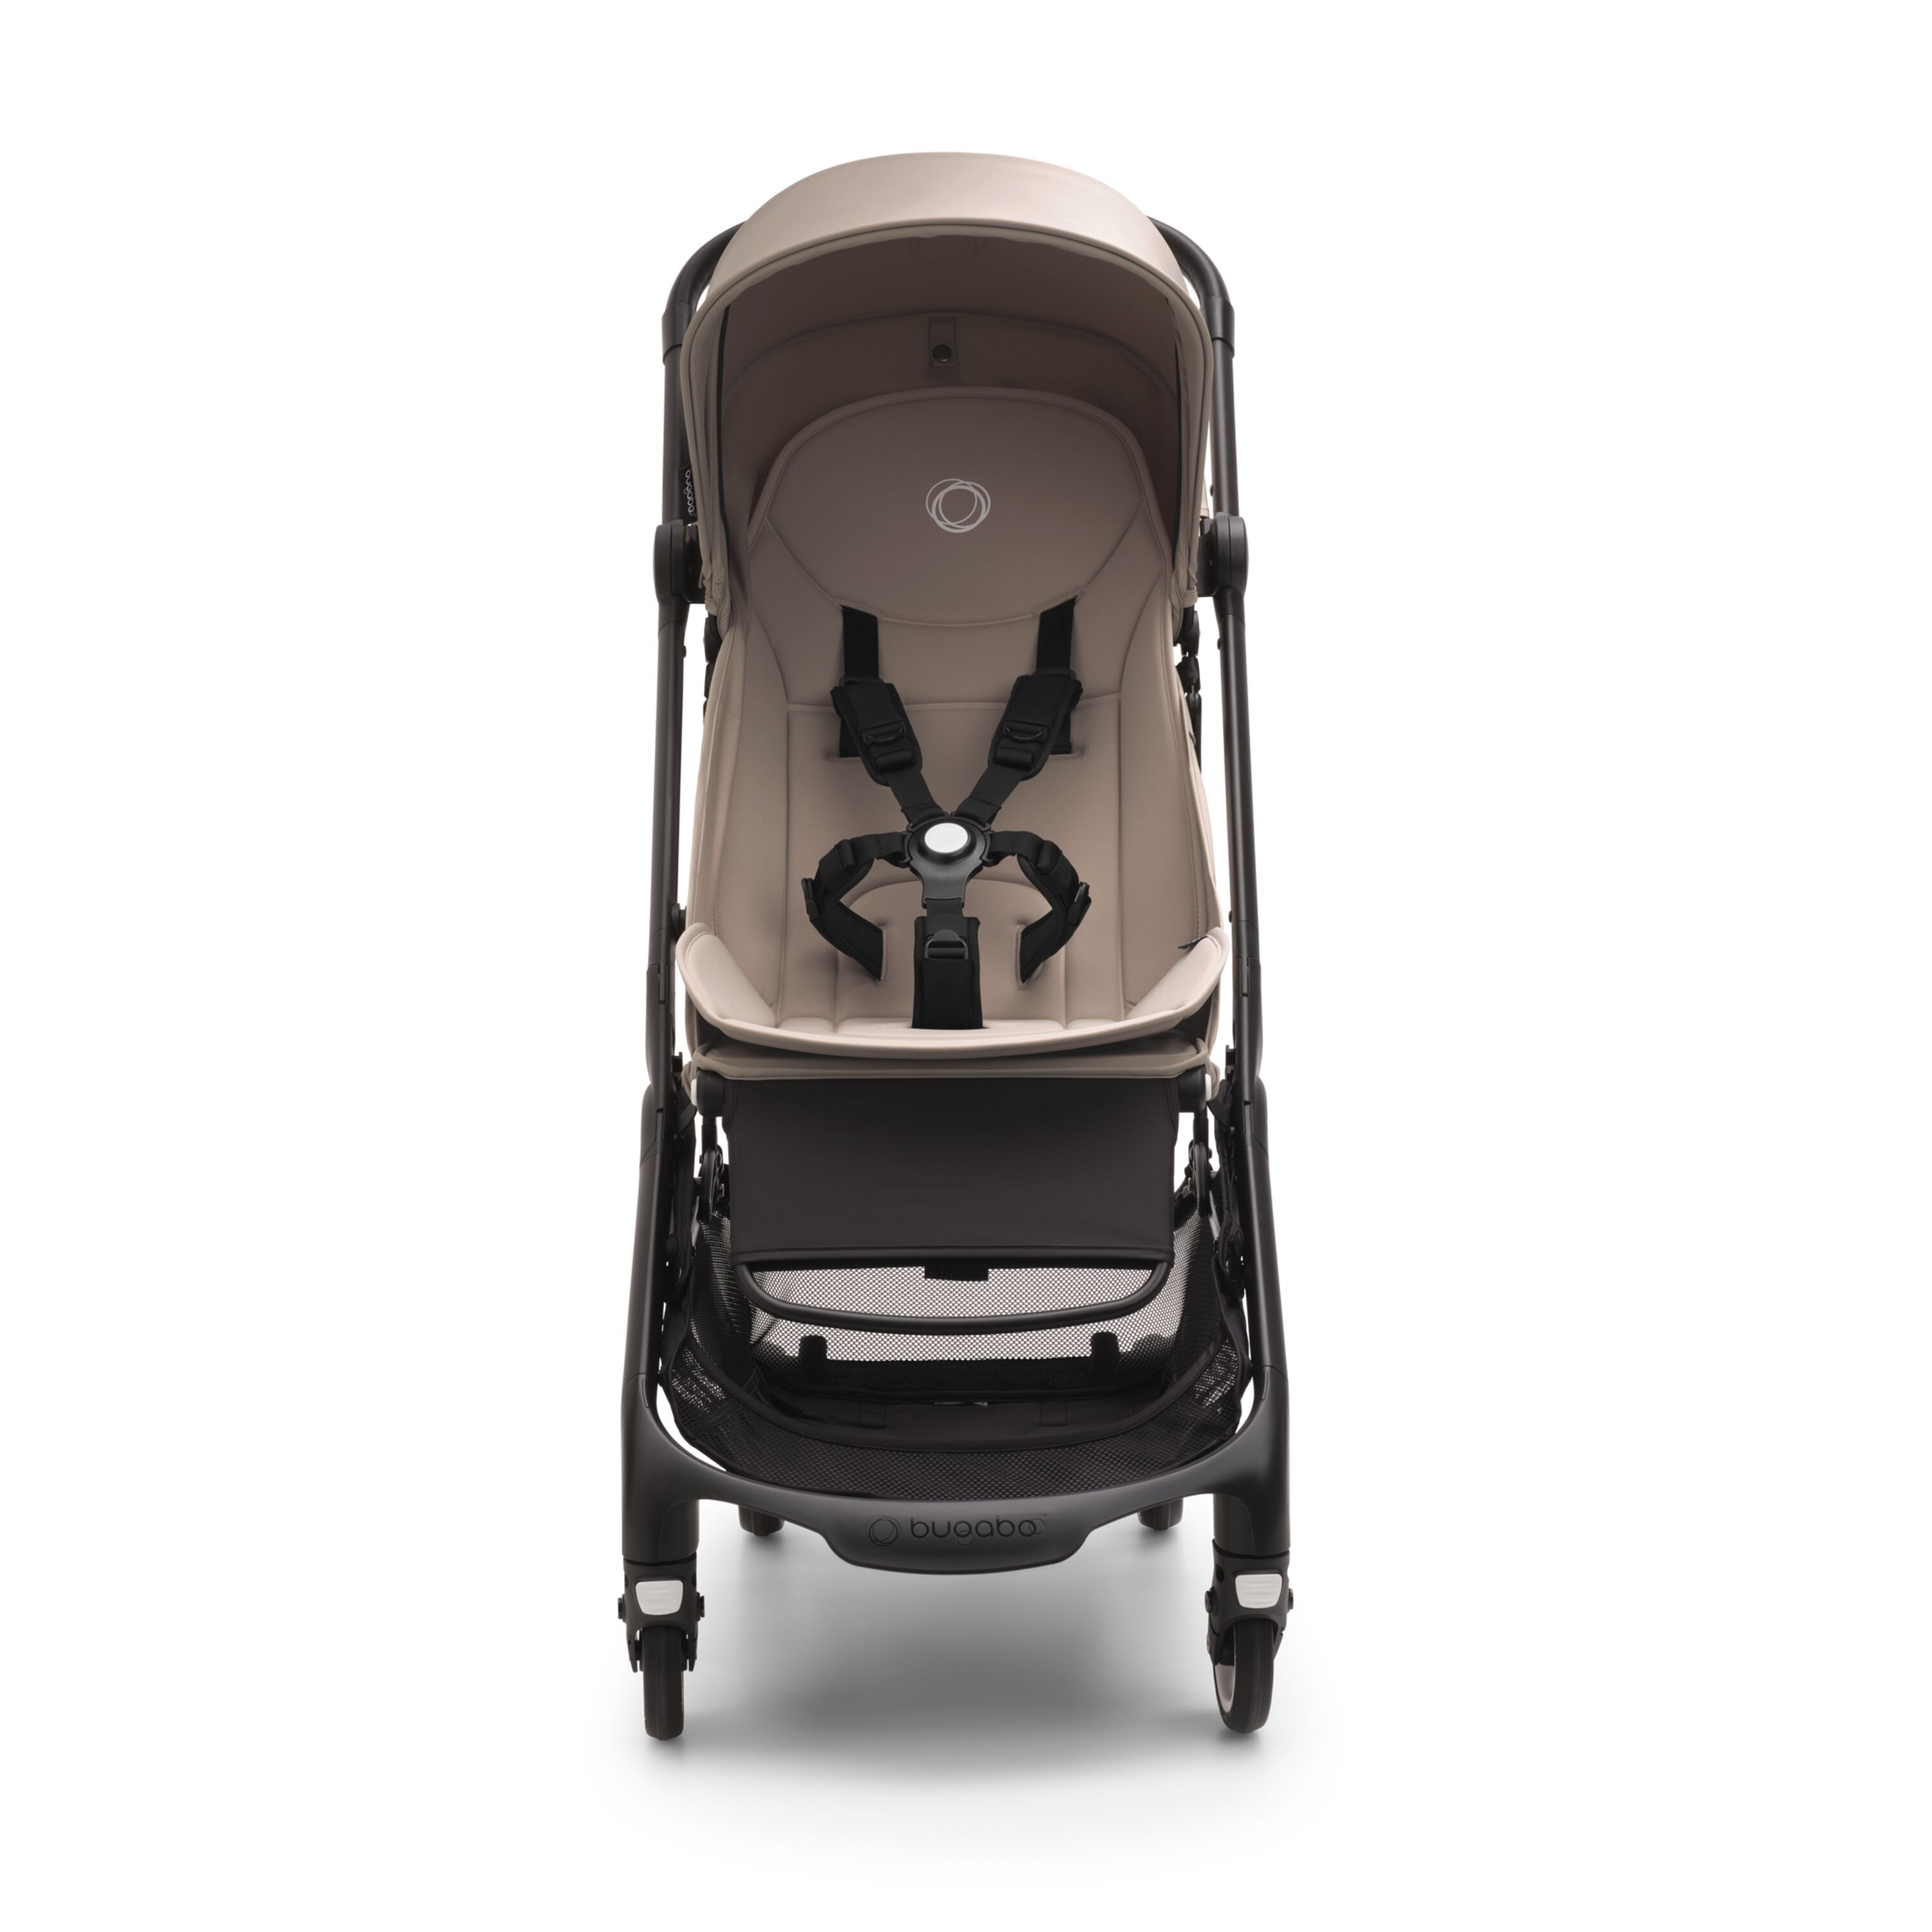 Silla de paseo Bugaboo Butterfly Desert taupe sun canopy, desert taupe  fabrics, black chassis